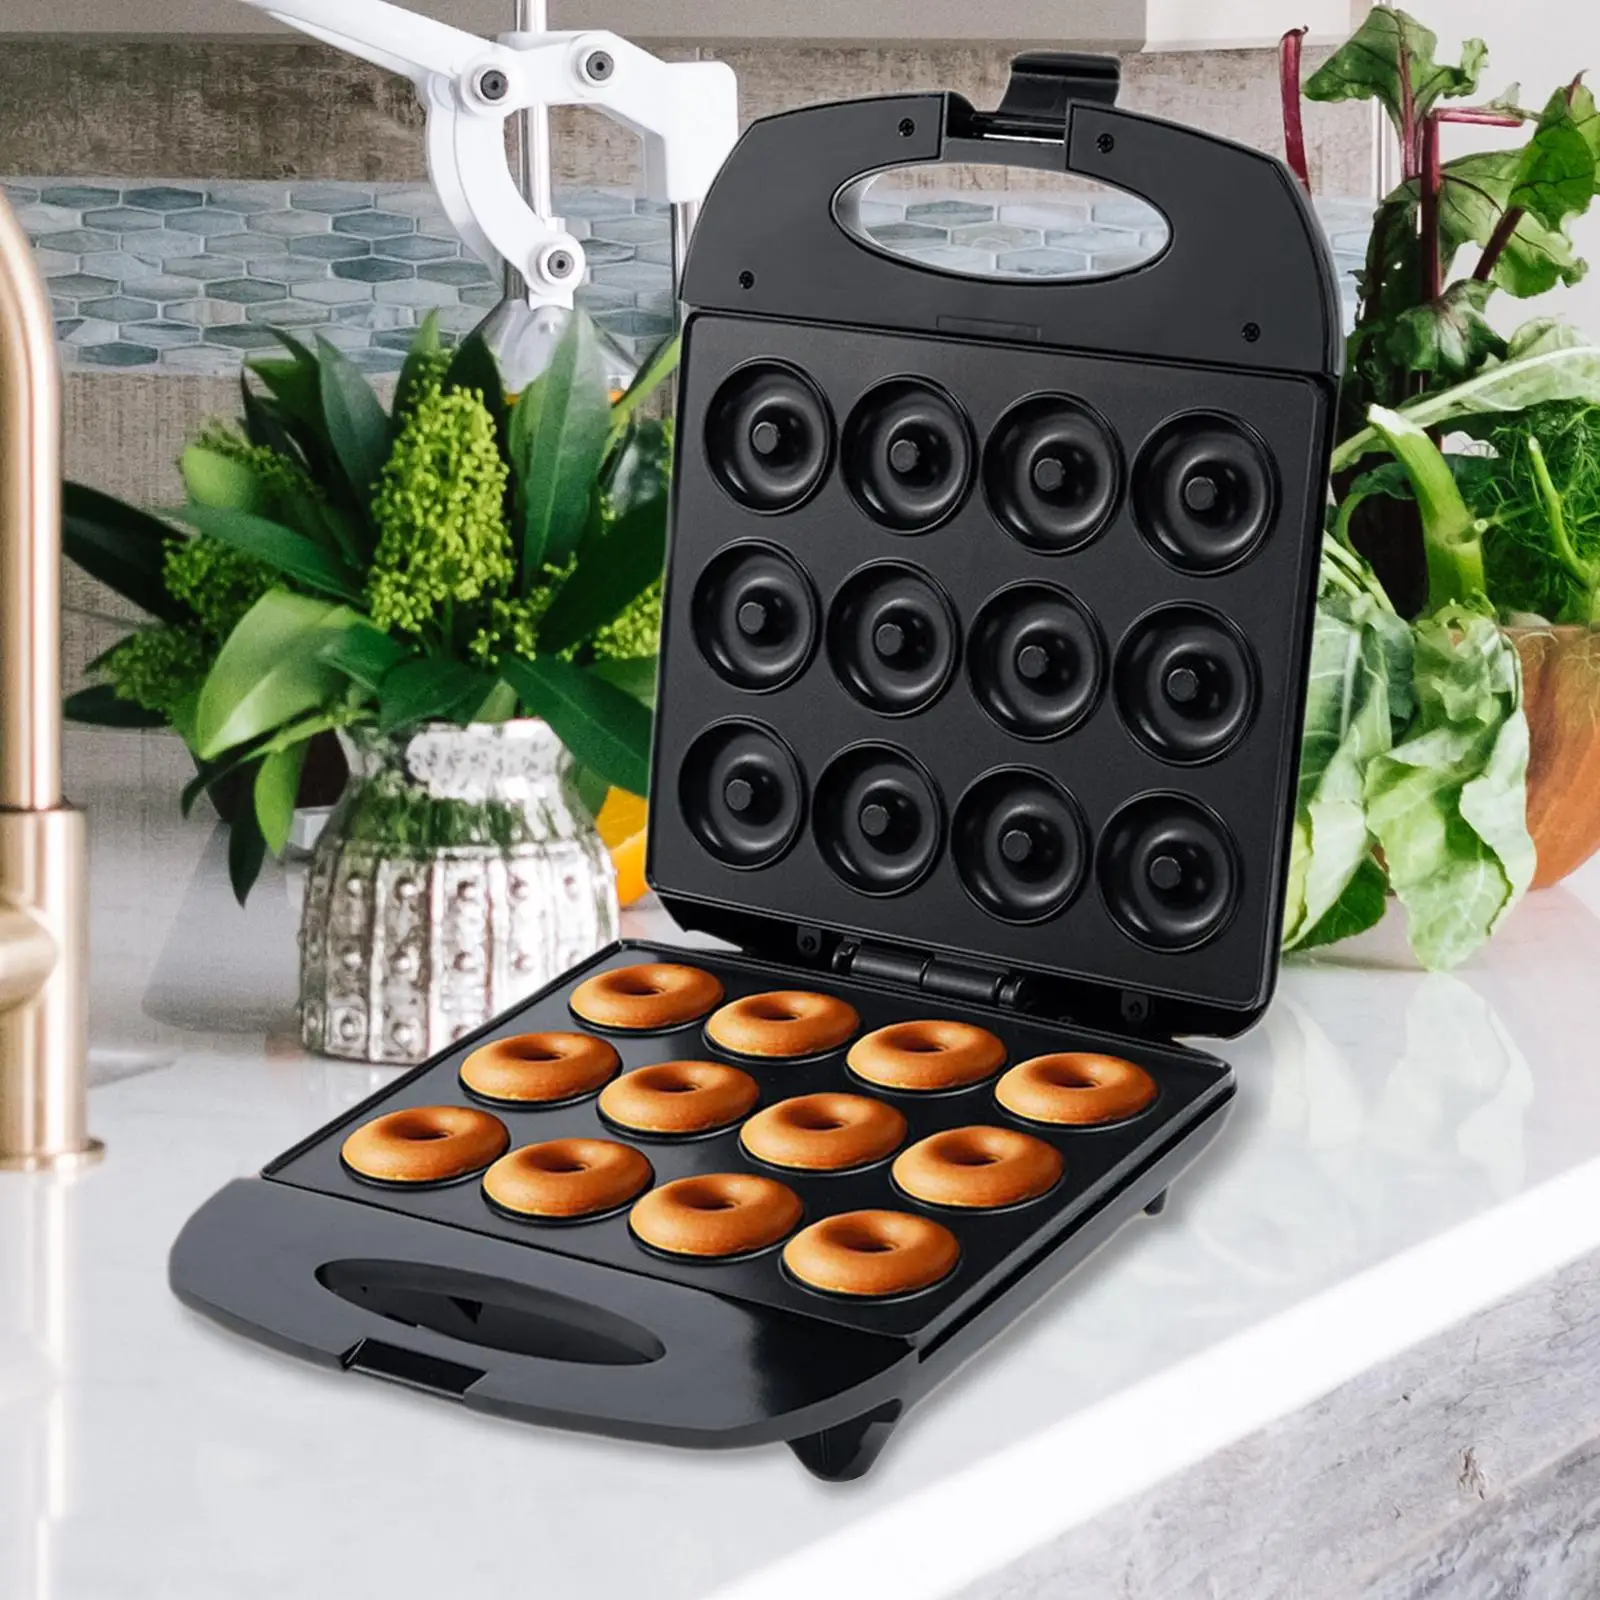 Donut Maker Machine Nonstick Surface with Indicator Light Automatic Heating Egg Cake Bread Baking Machine for Commercial Use DIY